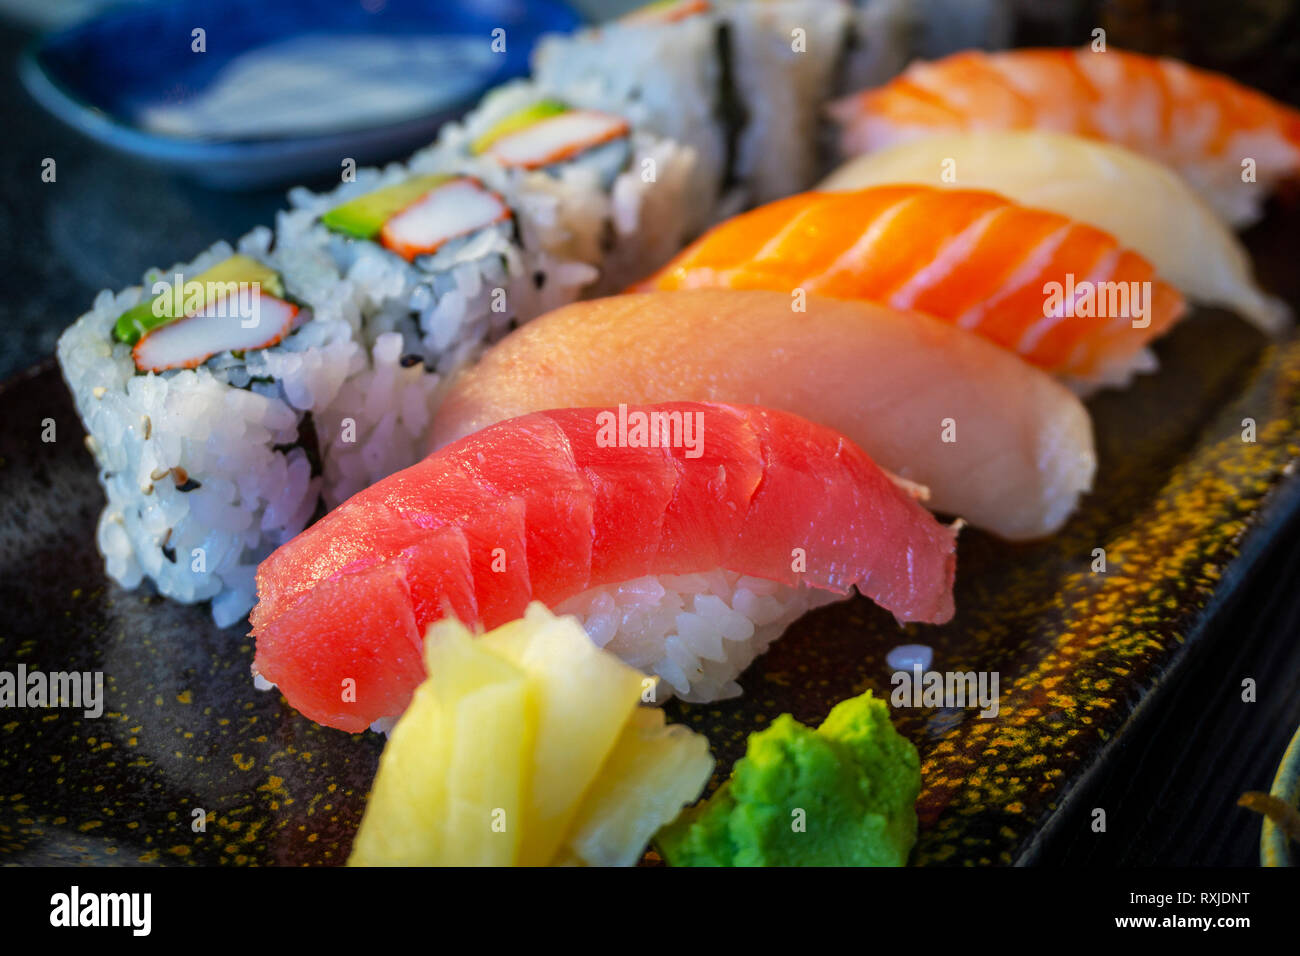 Fusion California Roll Sushi,stuff with Salmon,cucumber,crab Stick and  Sweet Egg,Stylist Food with Blur Boken Background,Japanese Stock Photo -  Image of maguro, local: 91910644